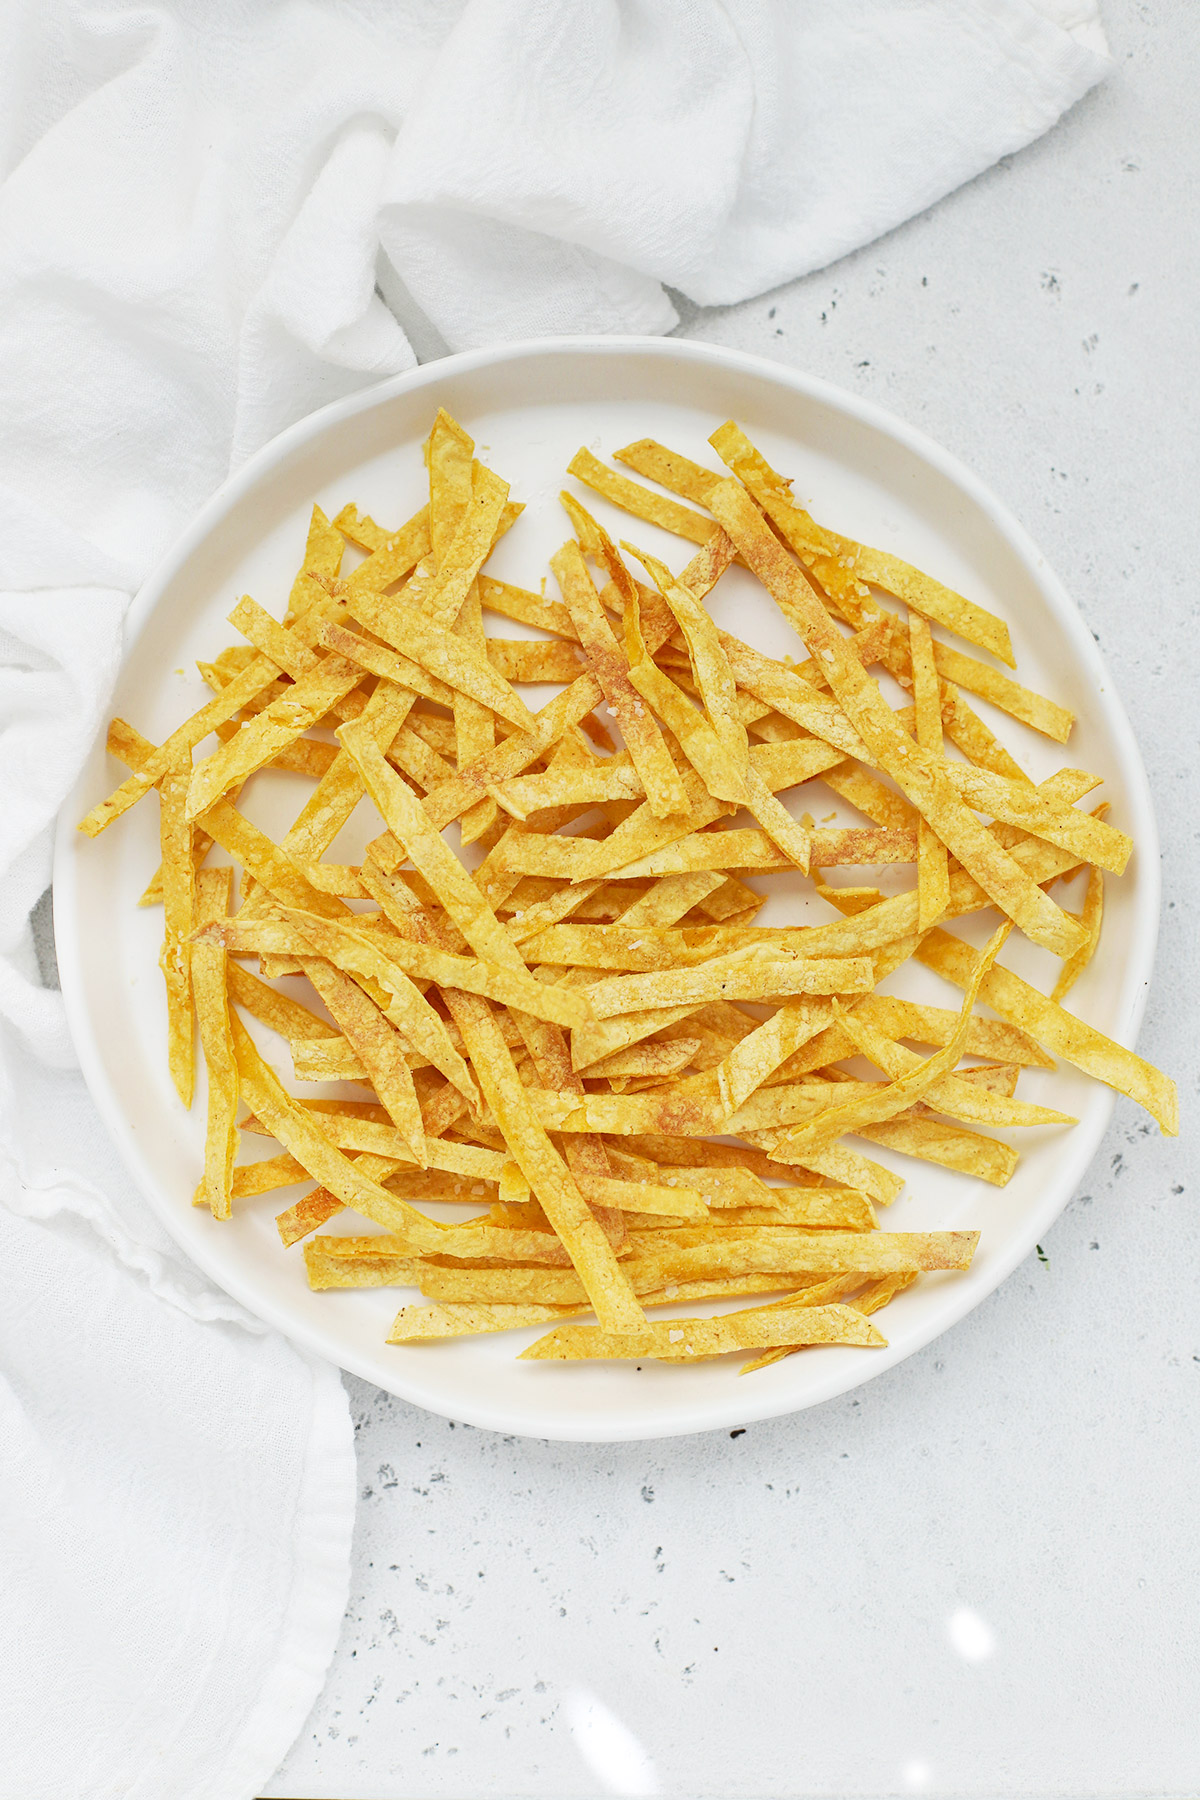 Overhead view of a plate of crispy baked tortilla strips on a white background